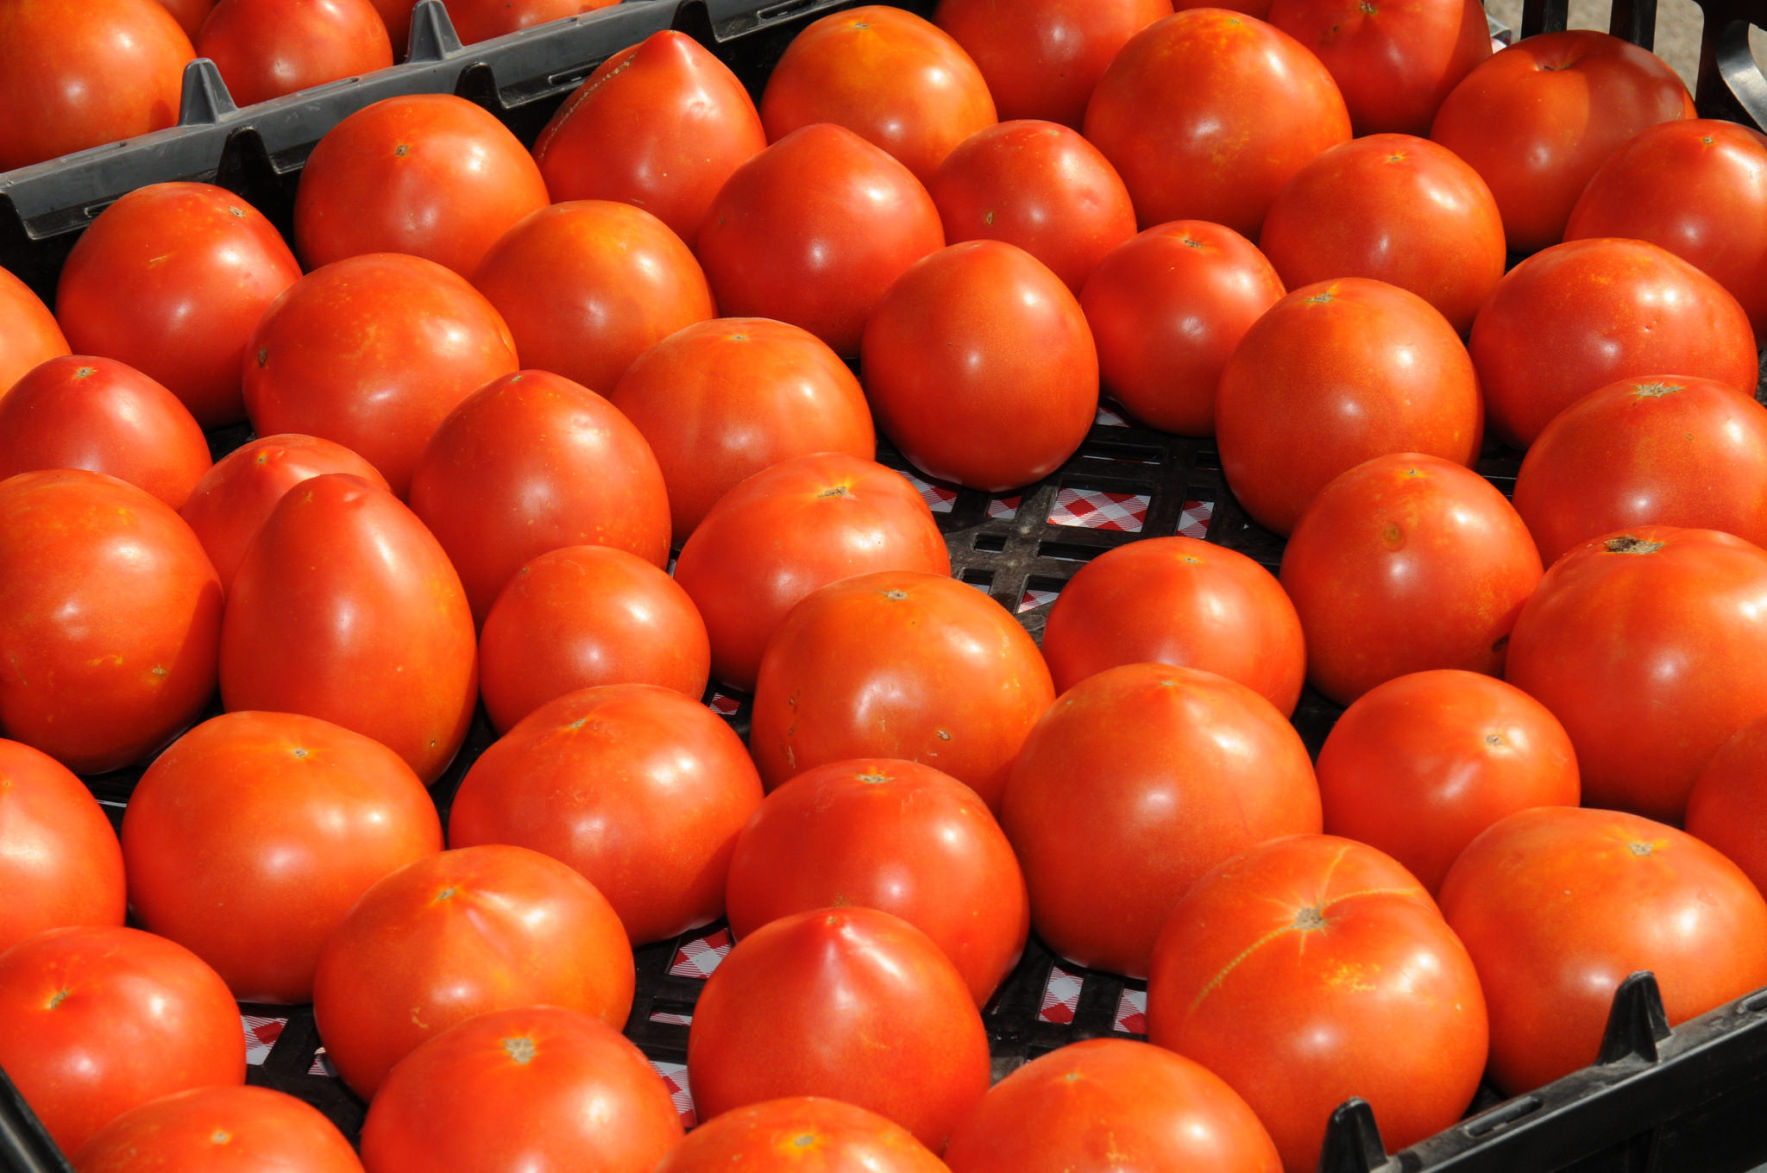 Tomato plants are prolific, their fruit can be canned, cooked or eaten fresh, and they are a source of vitamin C, making tomatoes the most popular plant in home gardens. (Photo courtesy of K-State Research and Extension.)